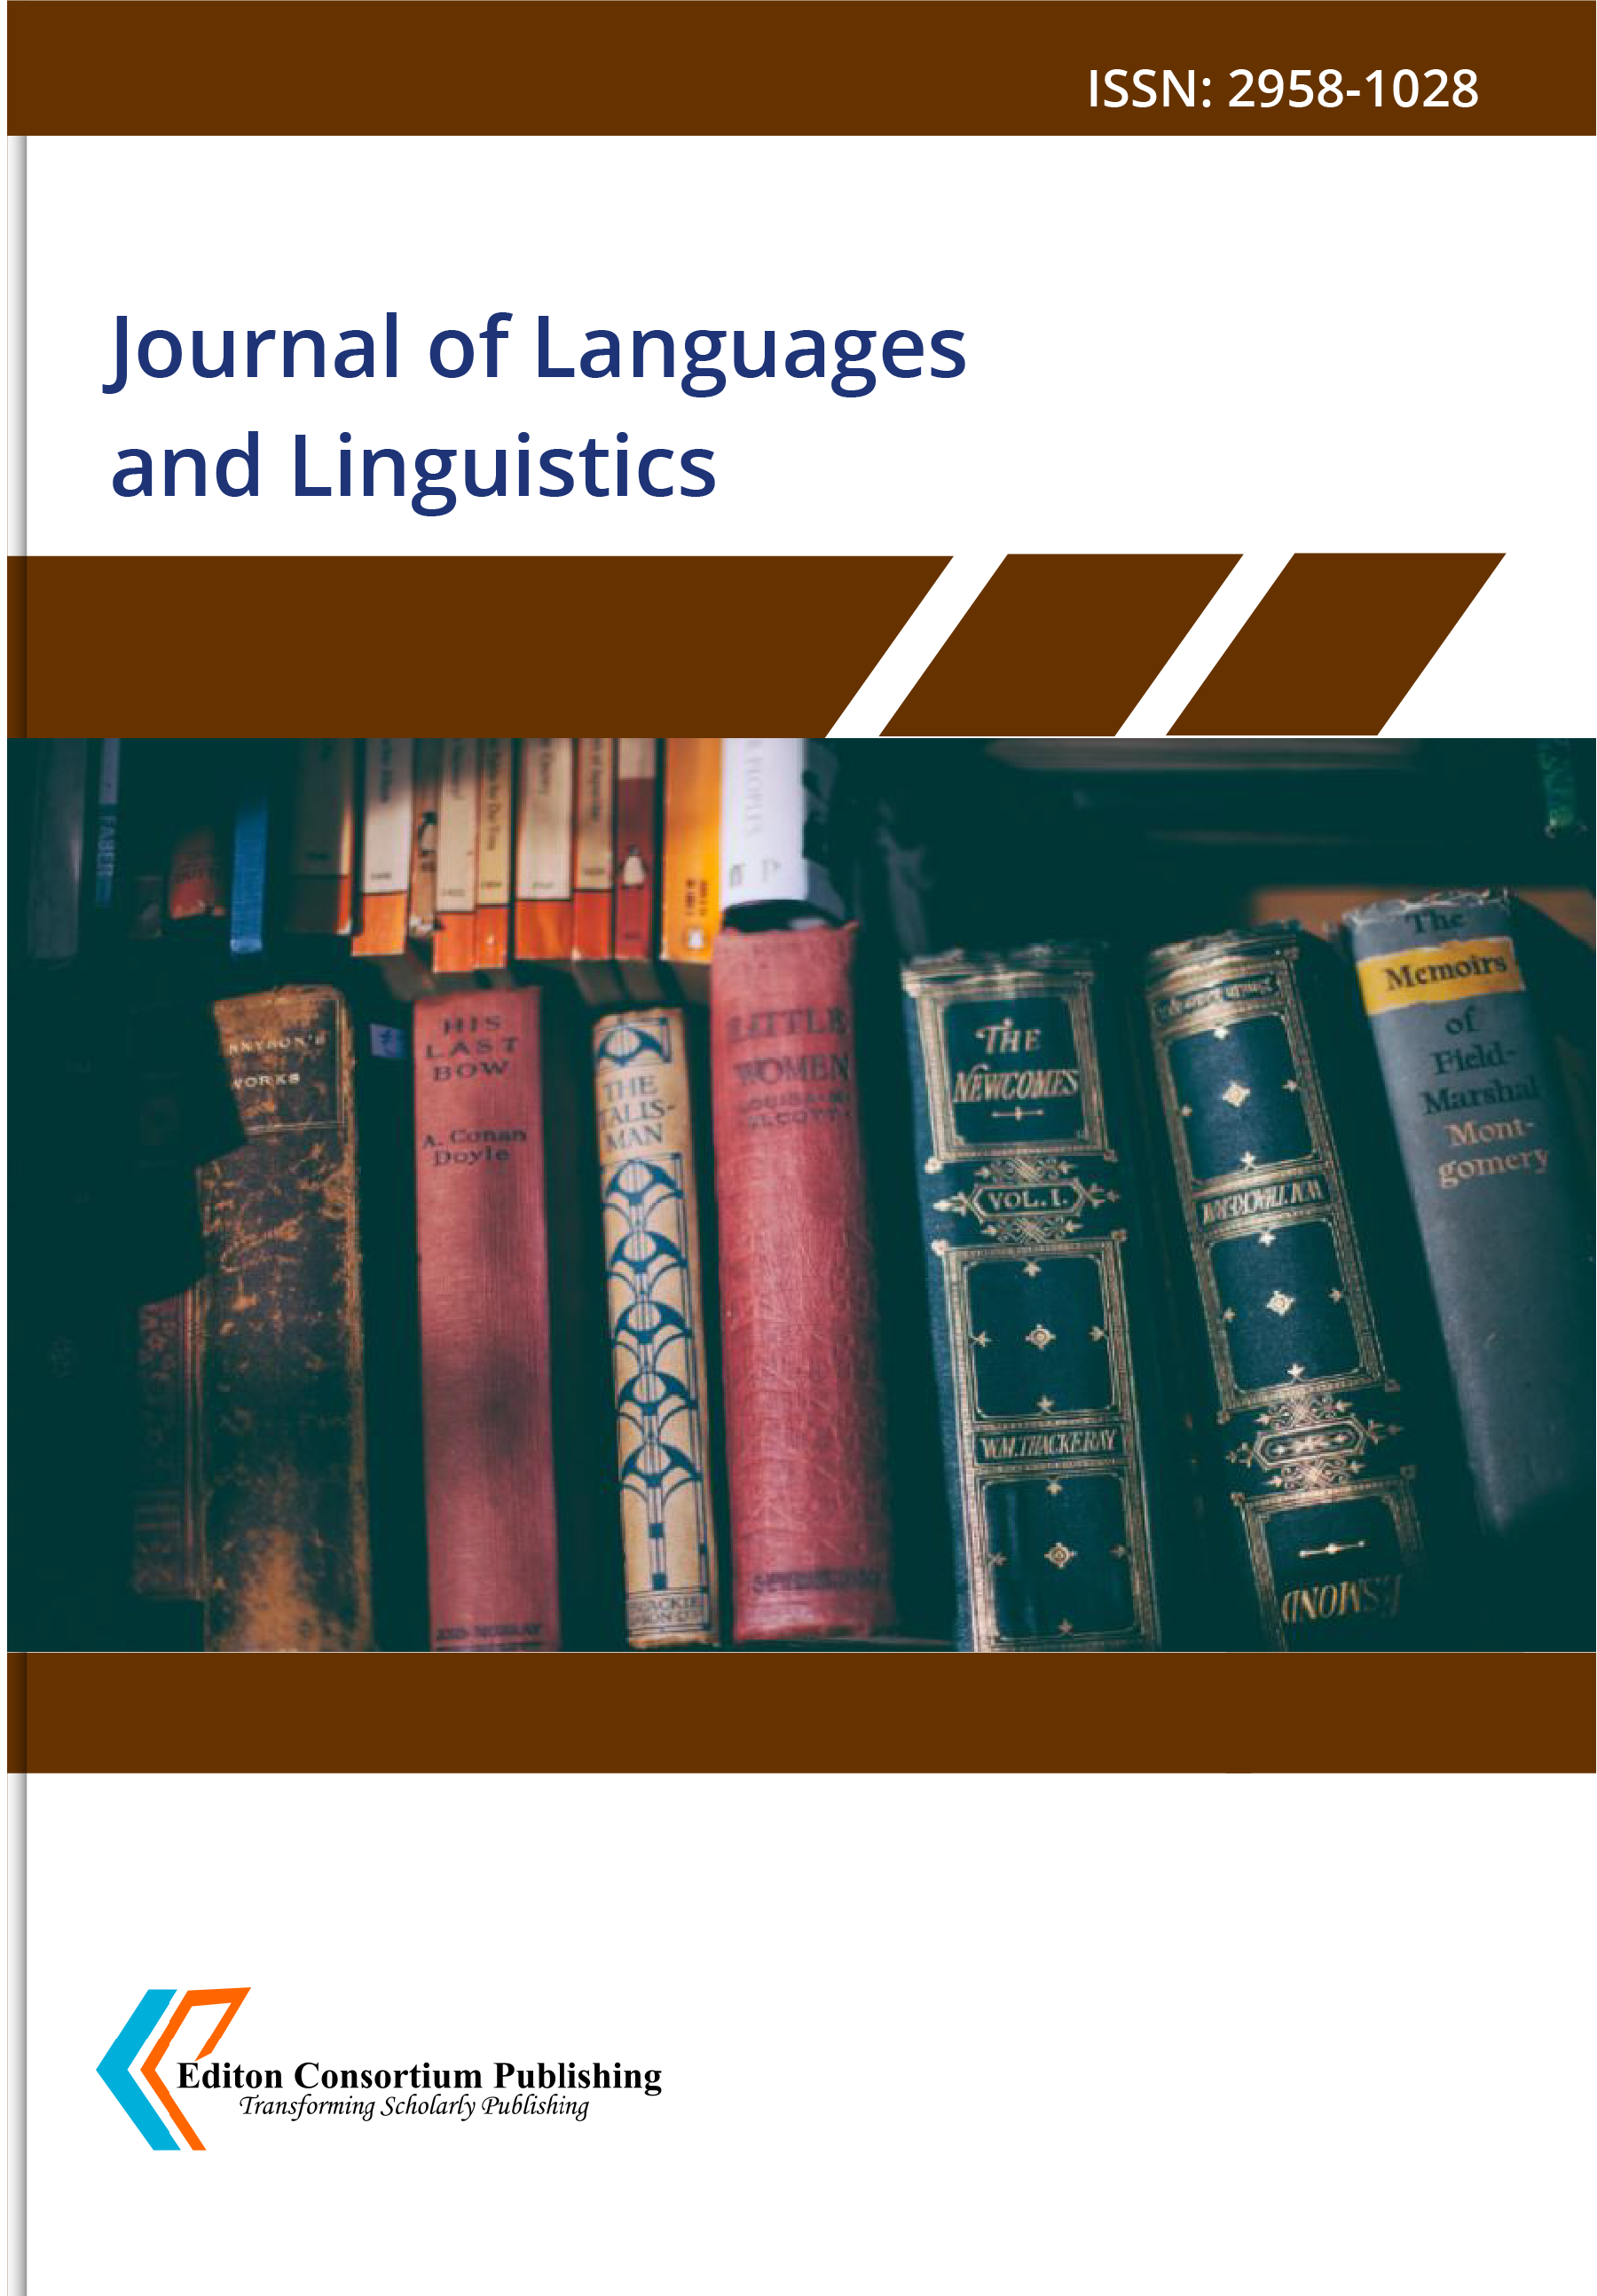  Journal of Languages and Linguistics